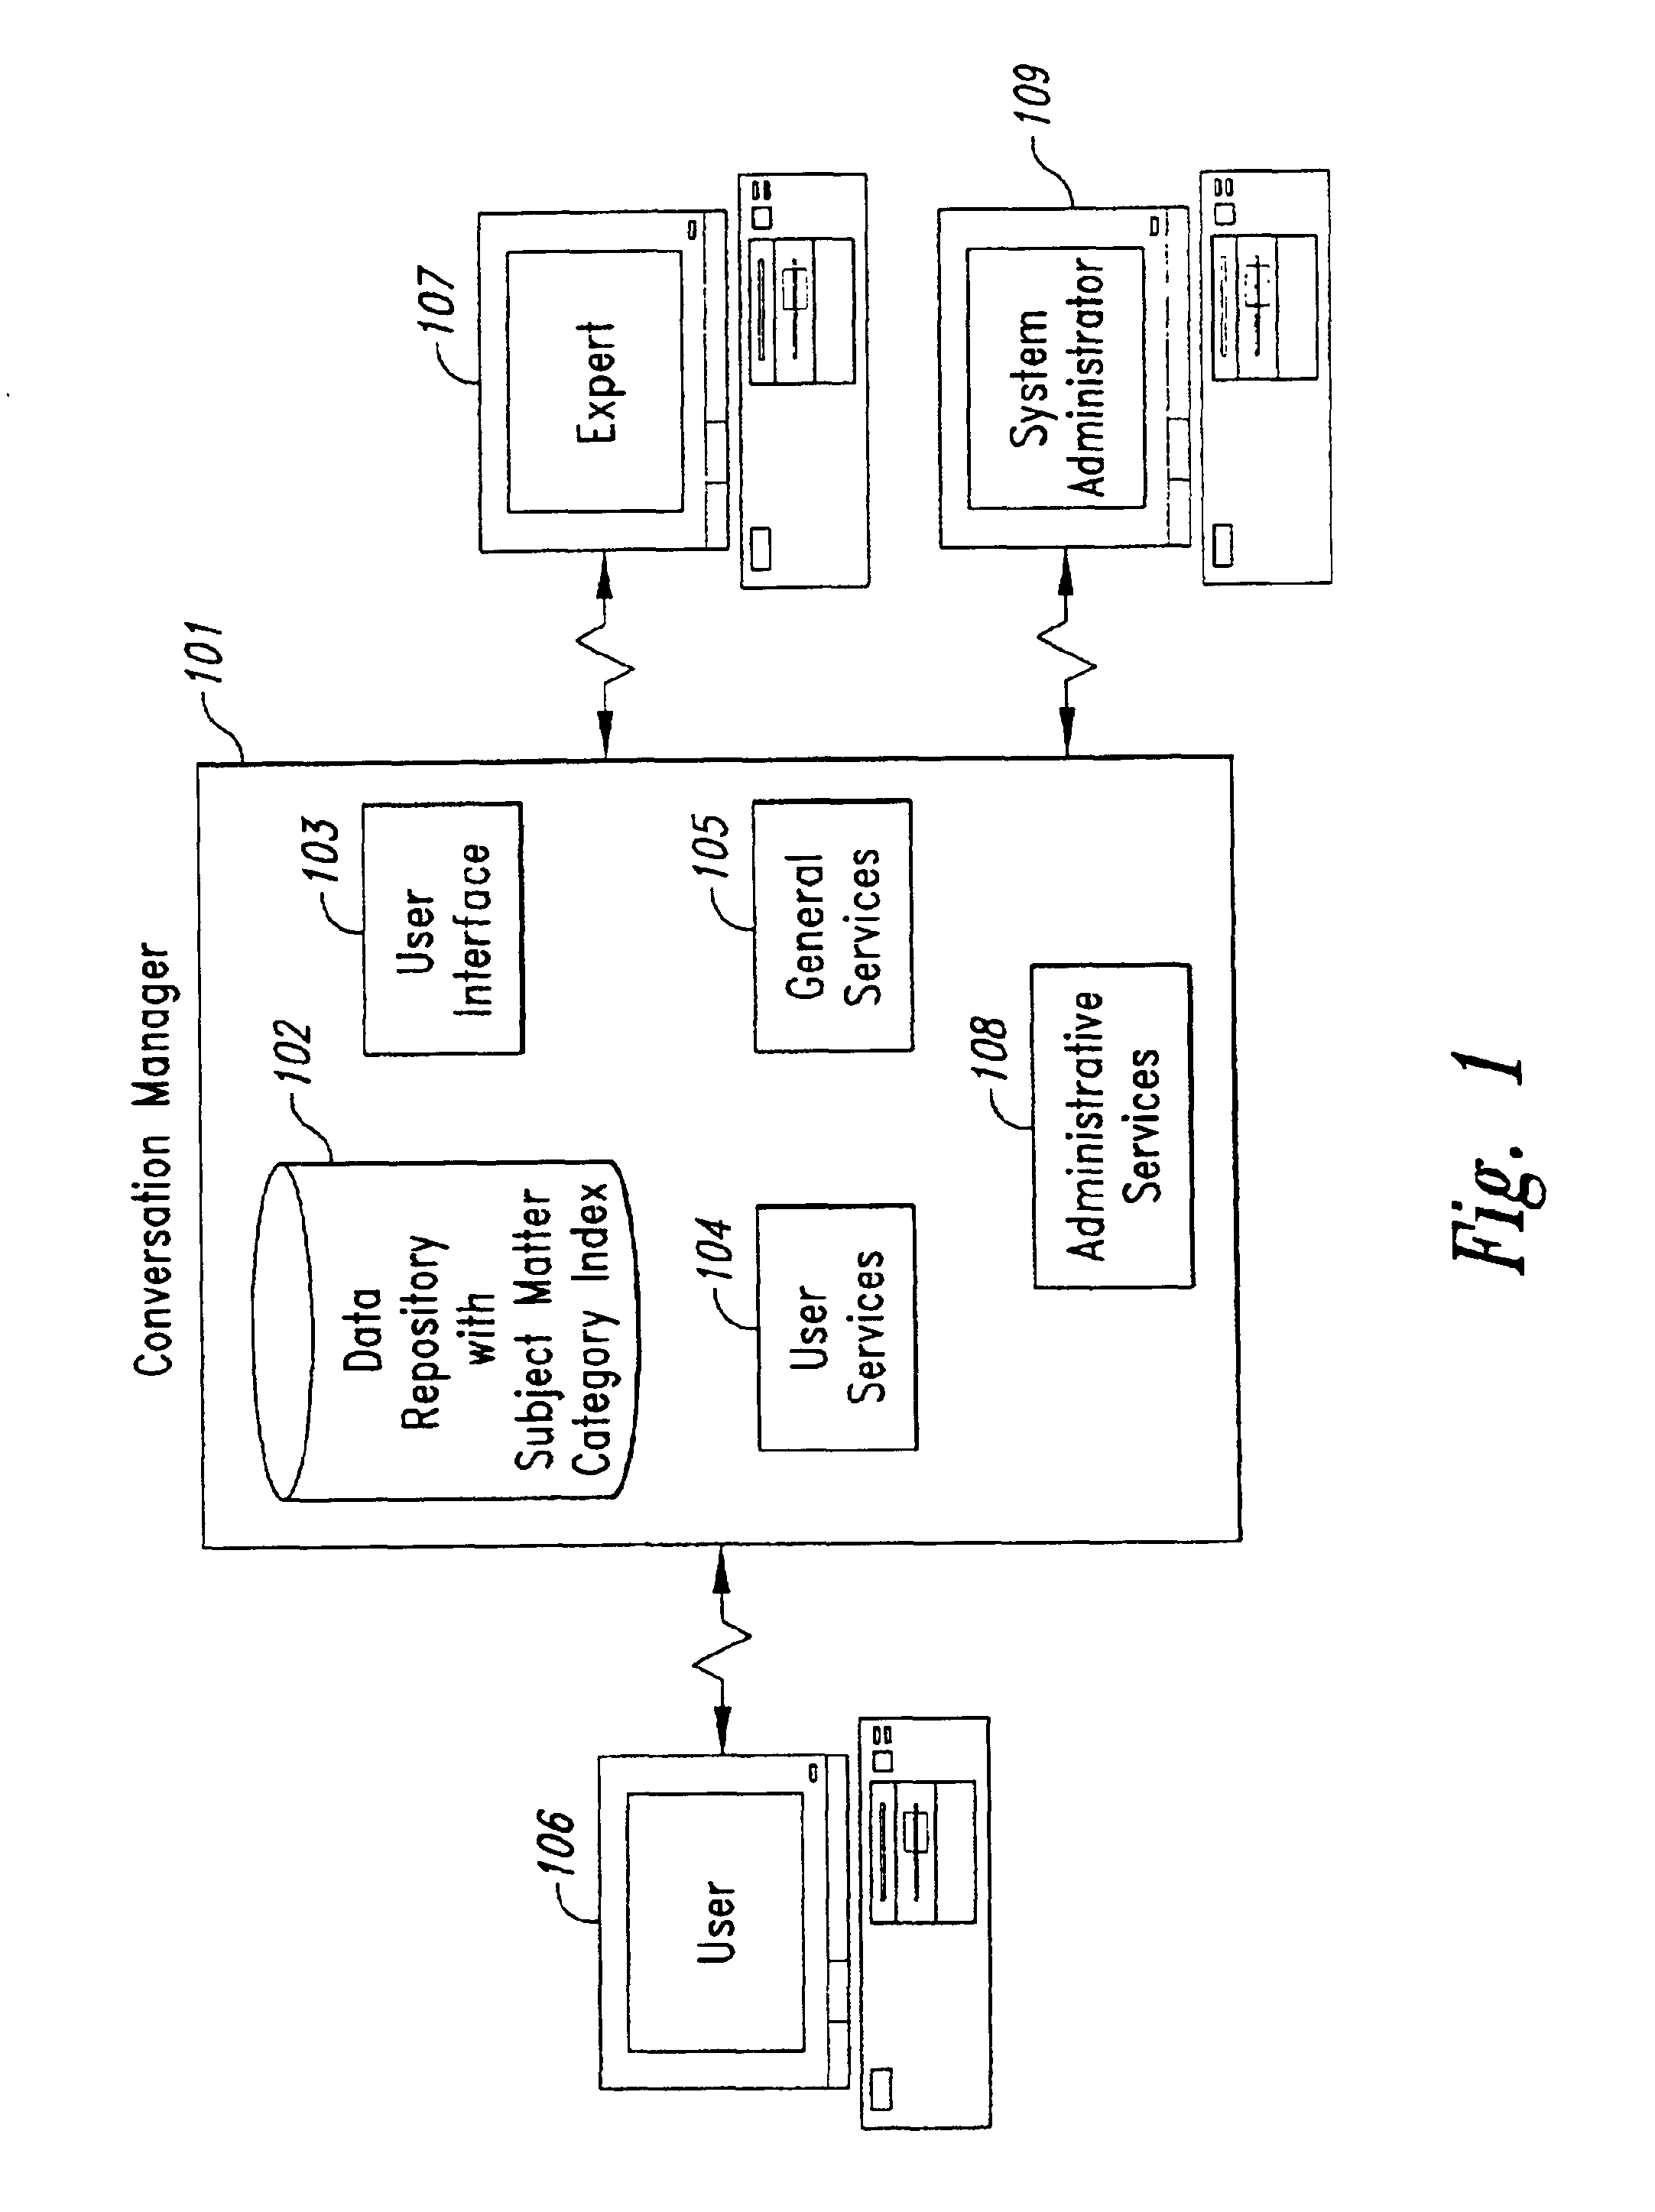 Method and system for enhanced knowledge management